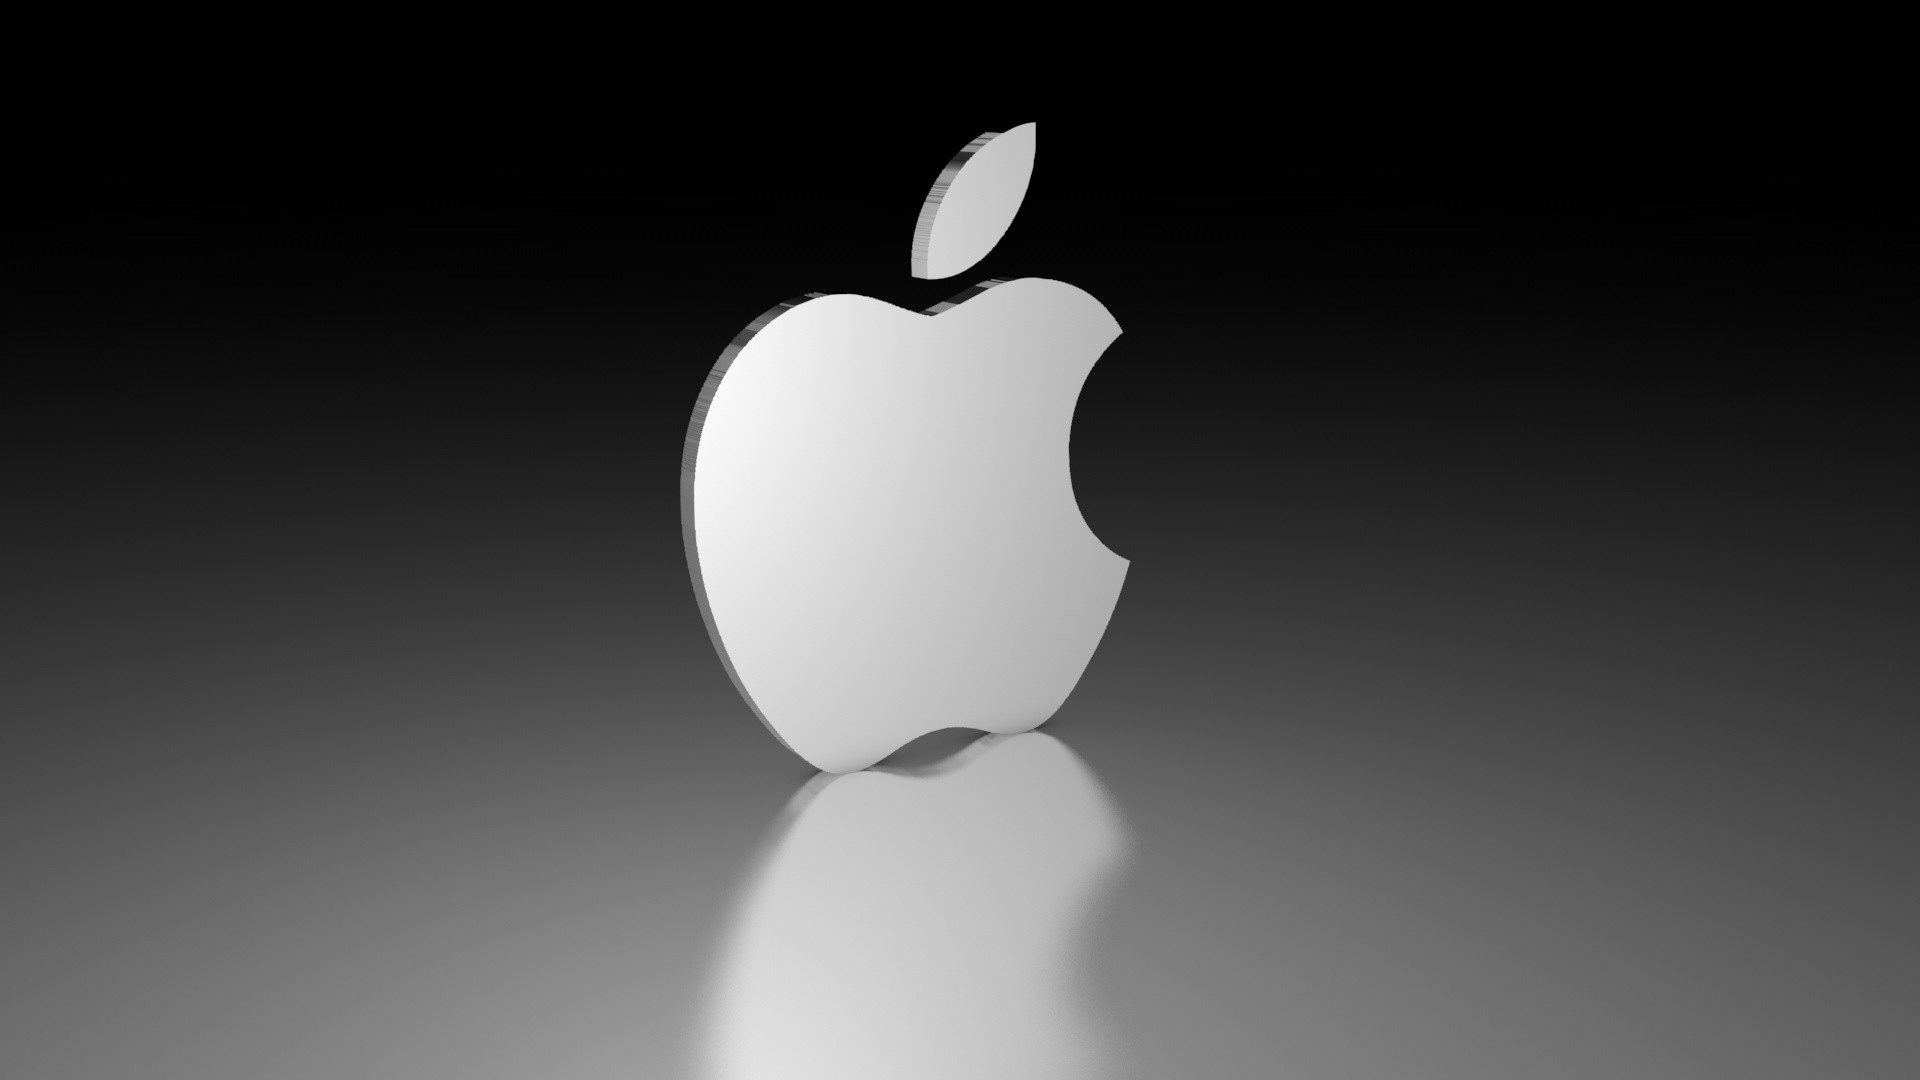 1920x1080  3D Apple Logo. How to set wallpaper on your desktop? Click the  download link from above and set the wallpaper on the desktop from your OS.